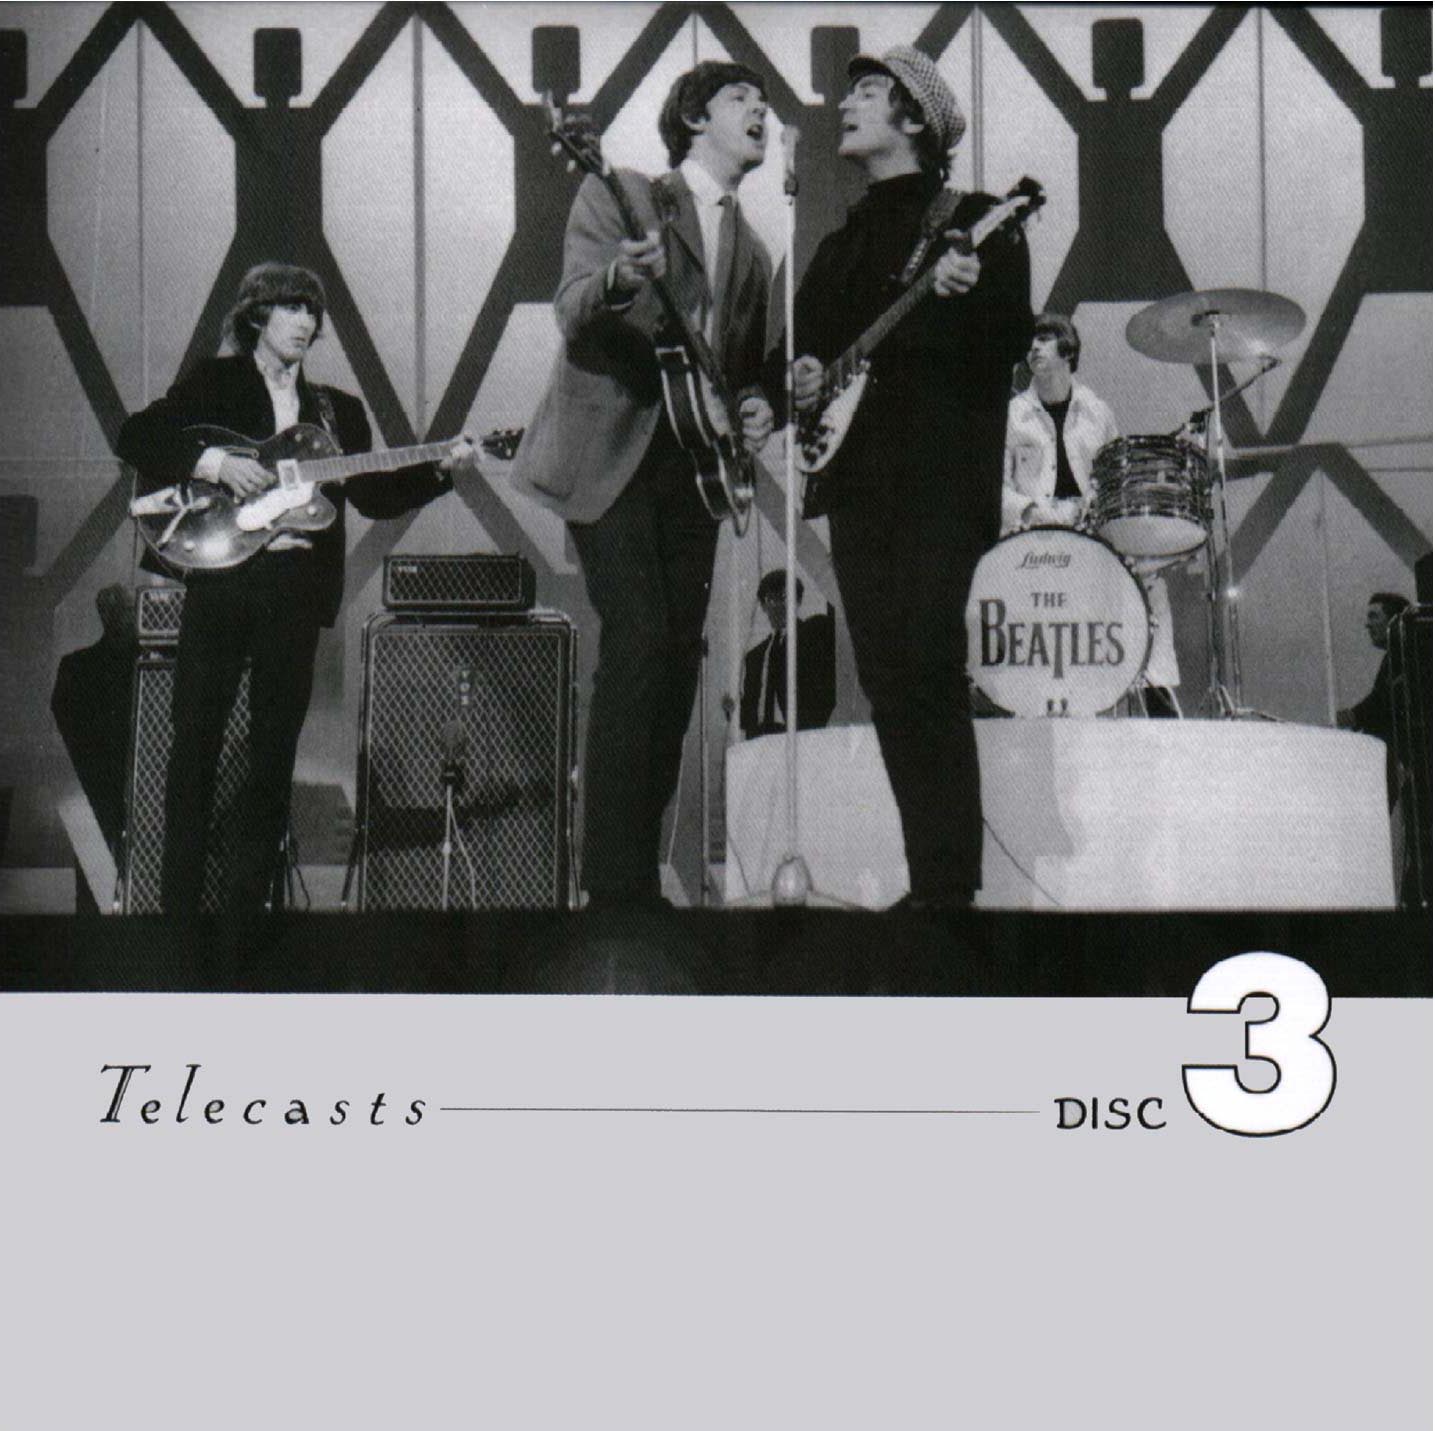 The Beatles - Telecasts CD at Discogs